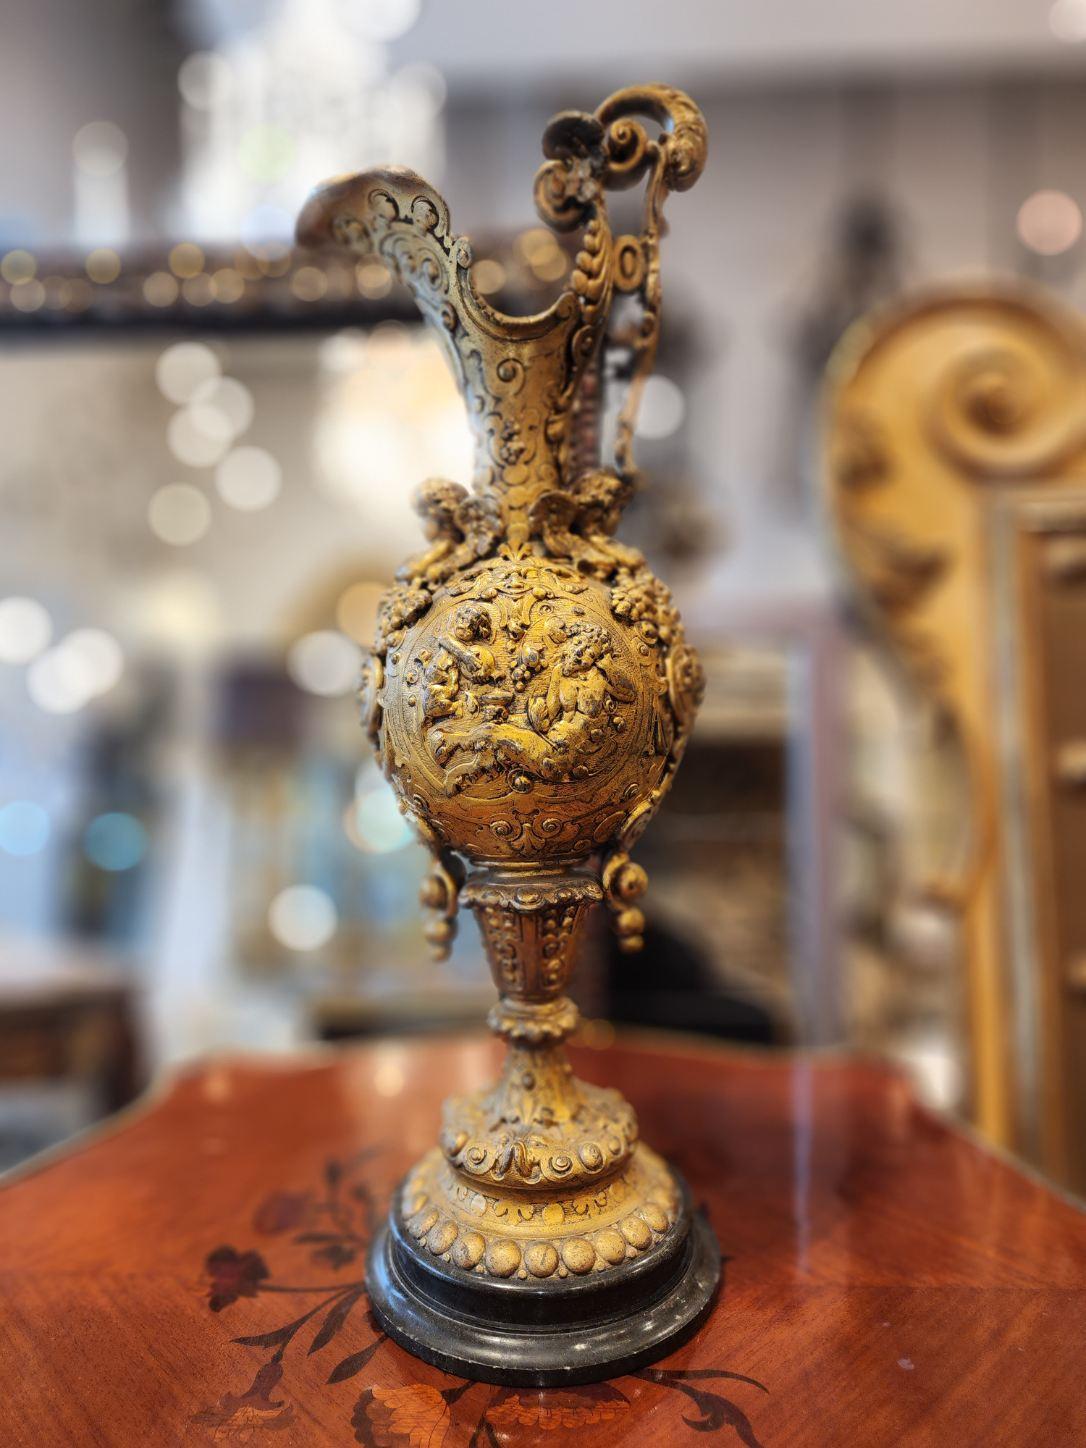 One of a kind Antique Napoleon III Period Bronze ewer. Kept in sparkling condition. Perfect for hallway Decor.